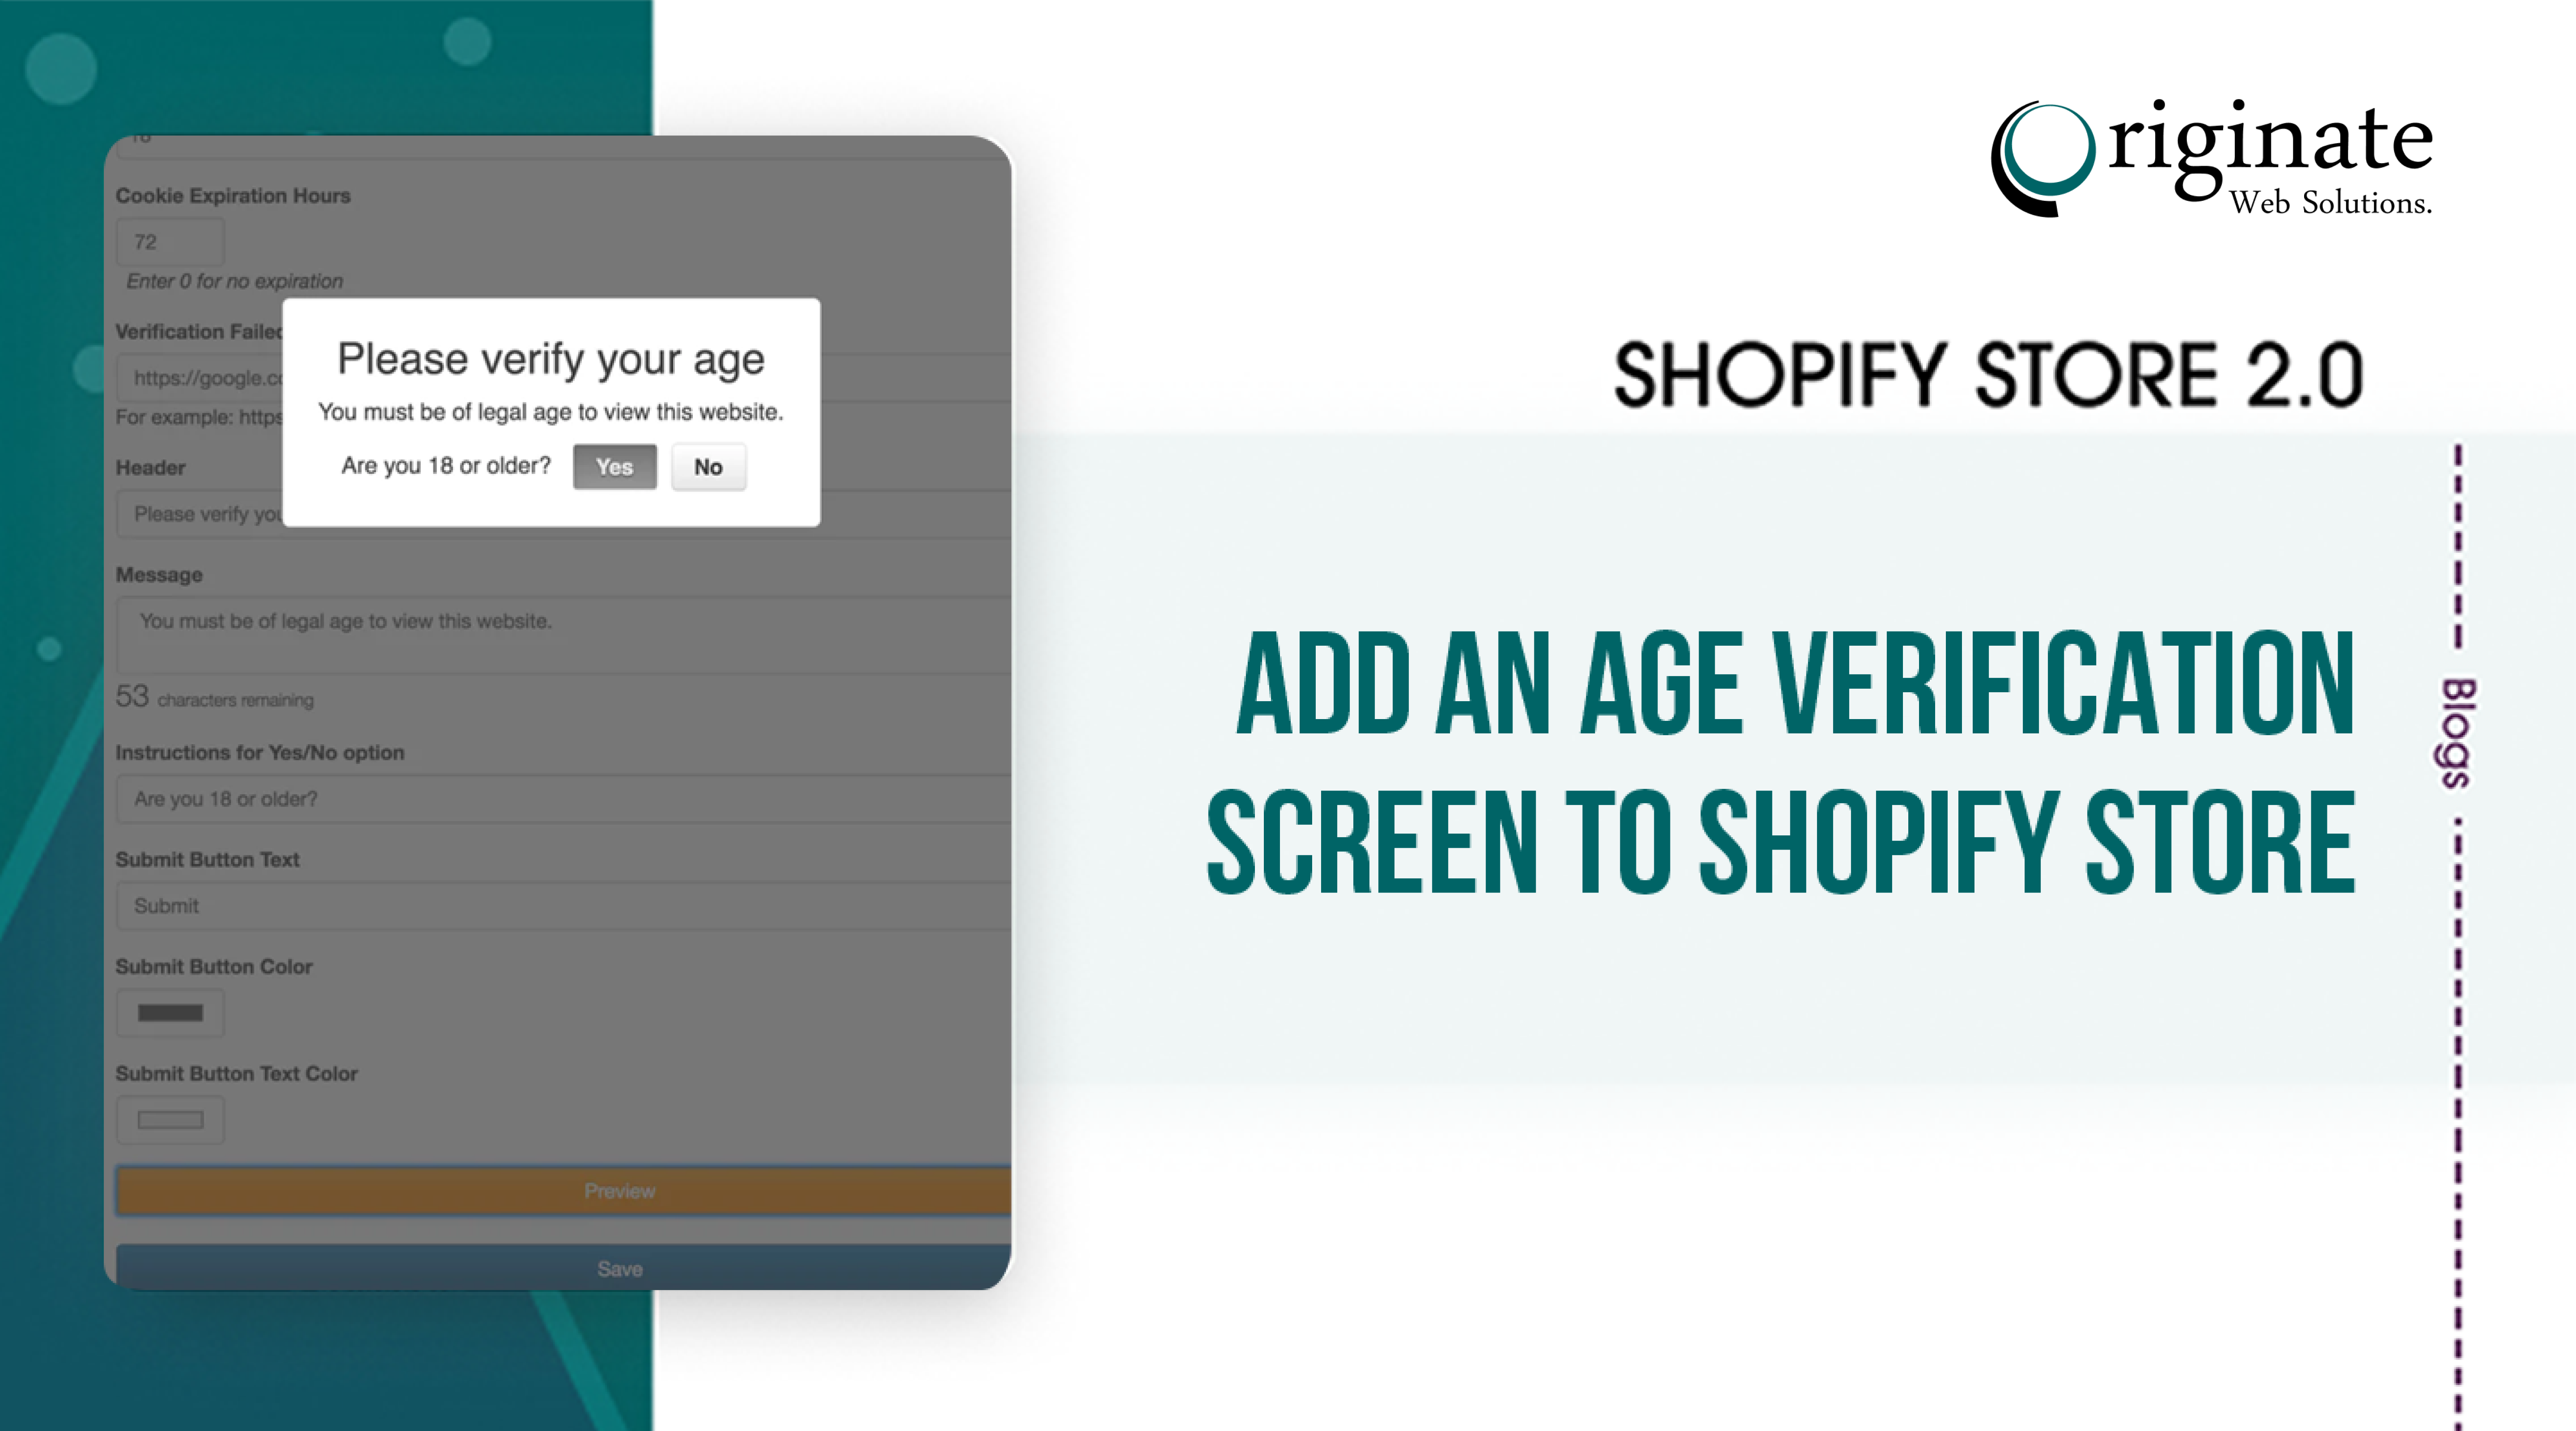 Add an Age Verification screen to Shopify store